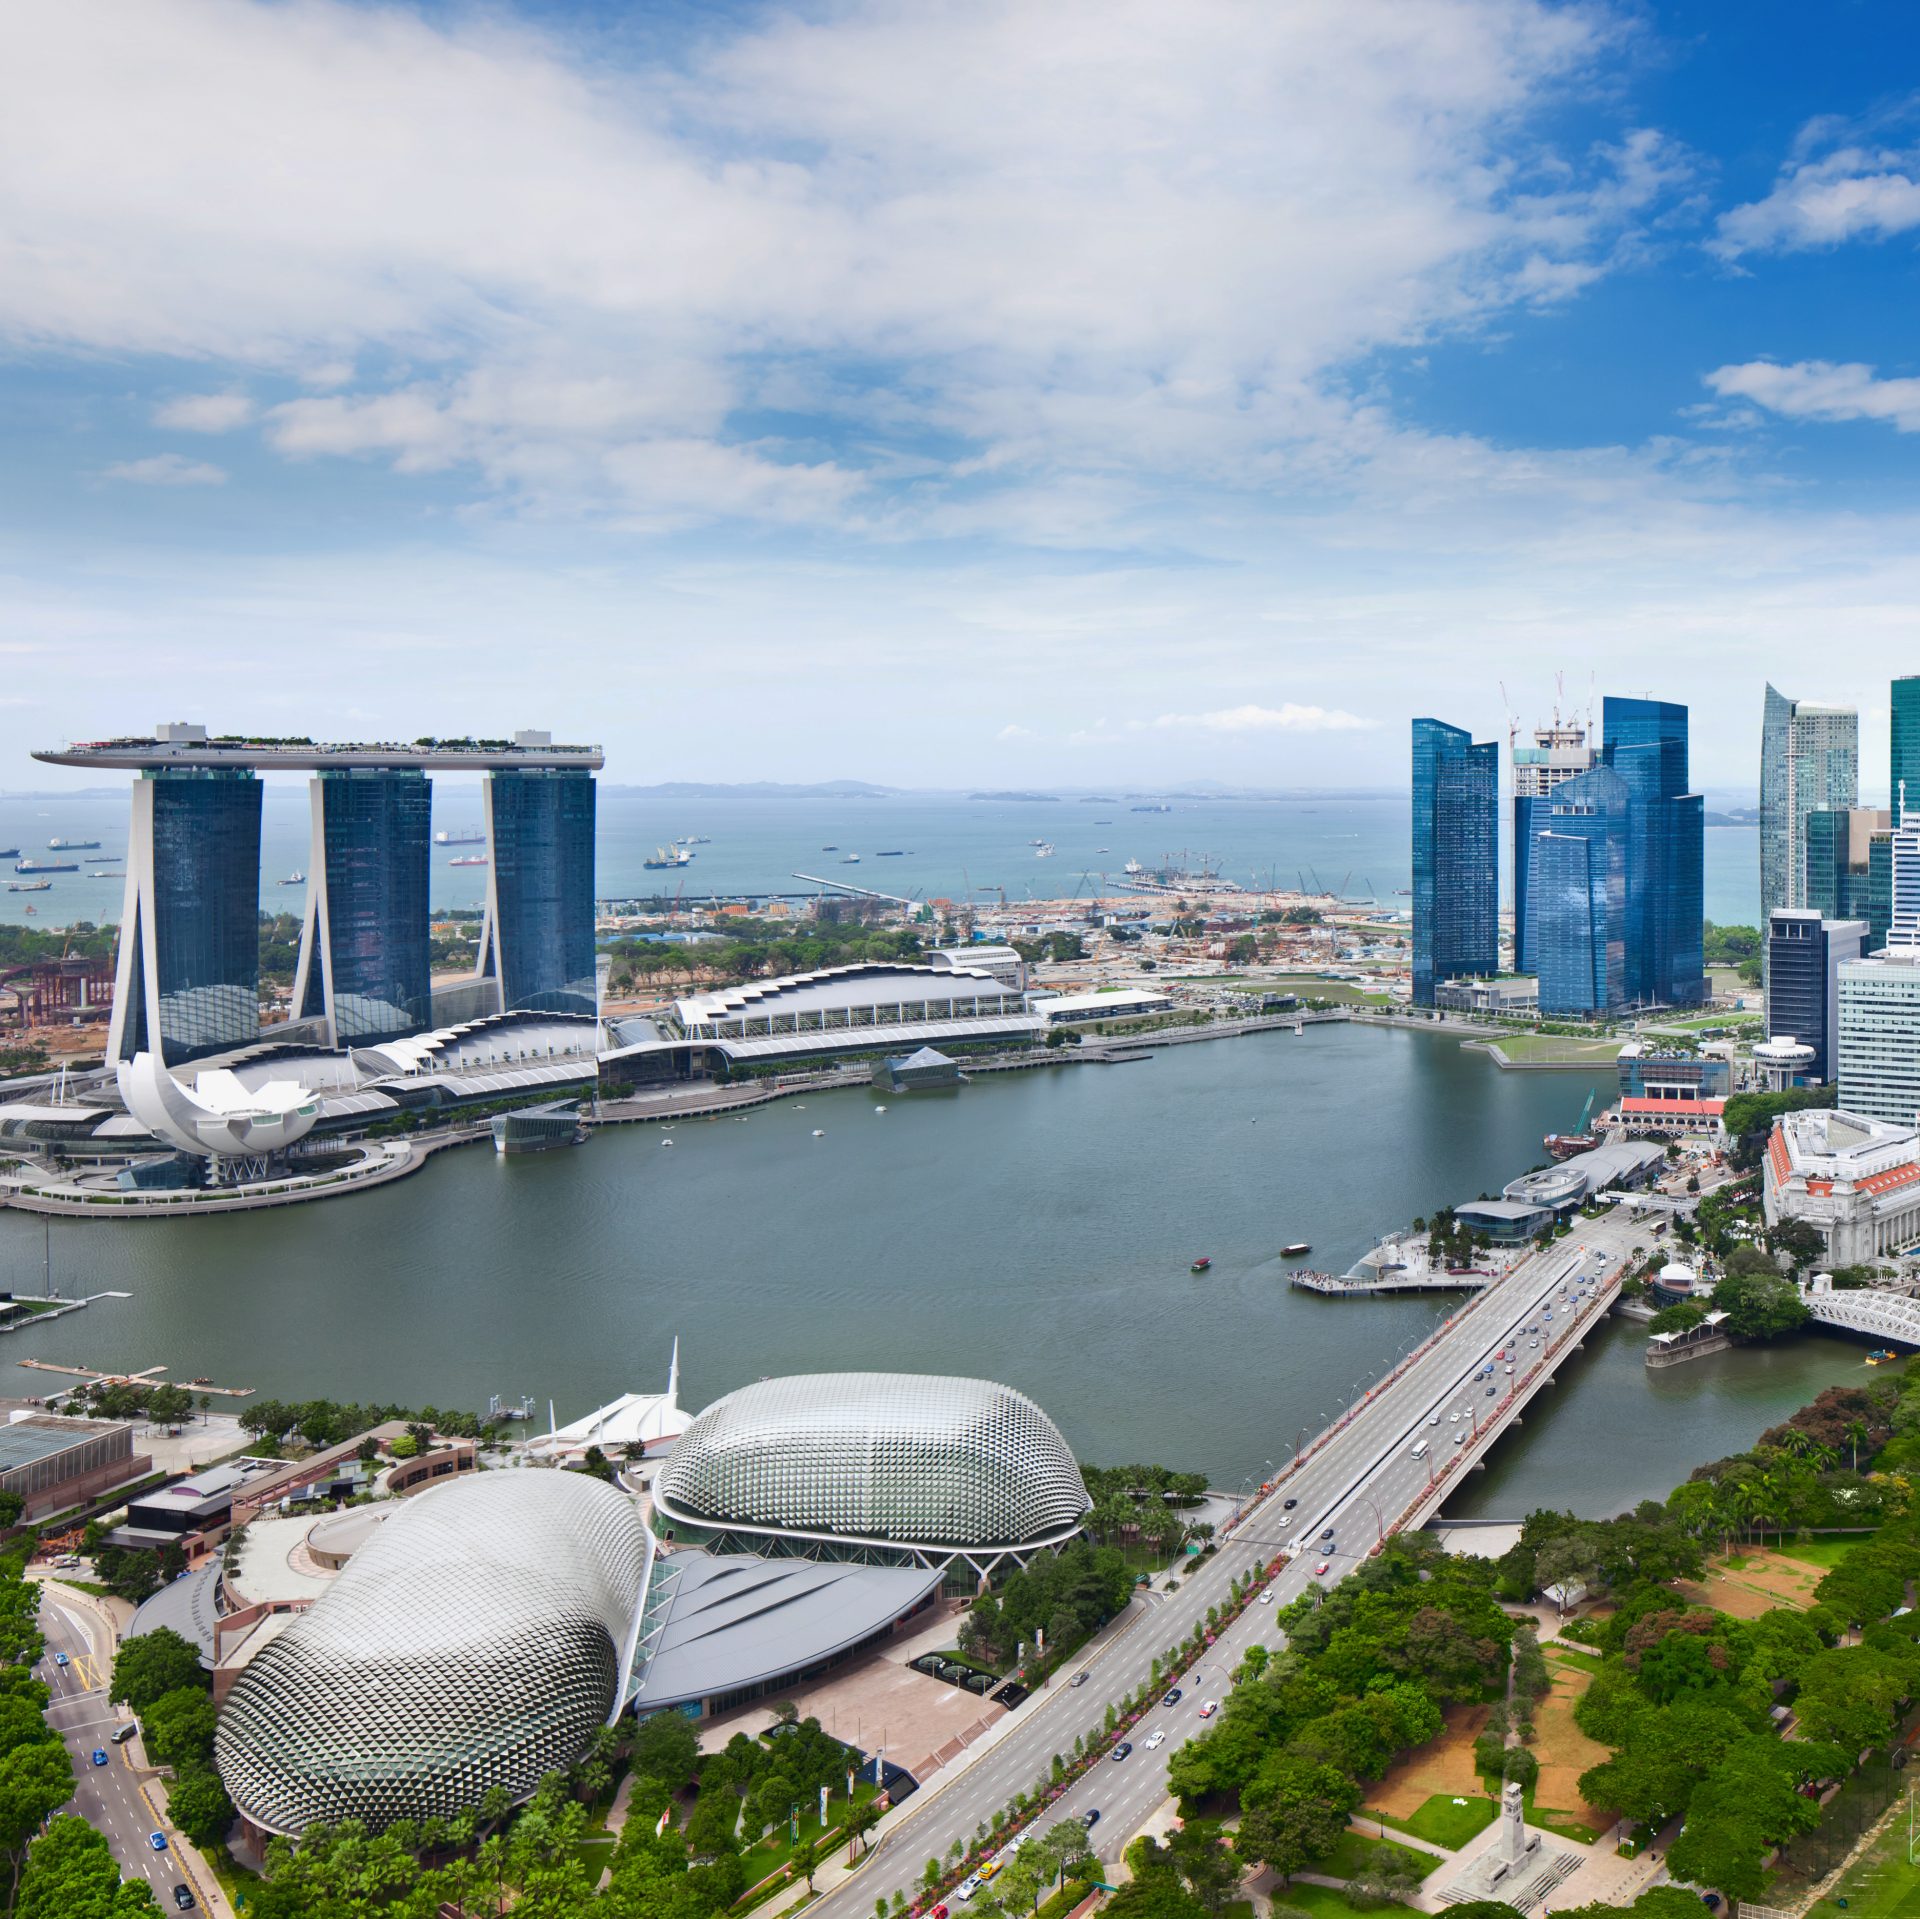 The image shows the city of Singapore.